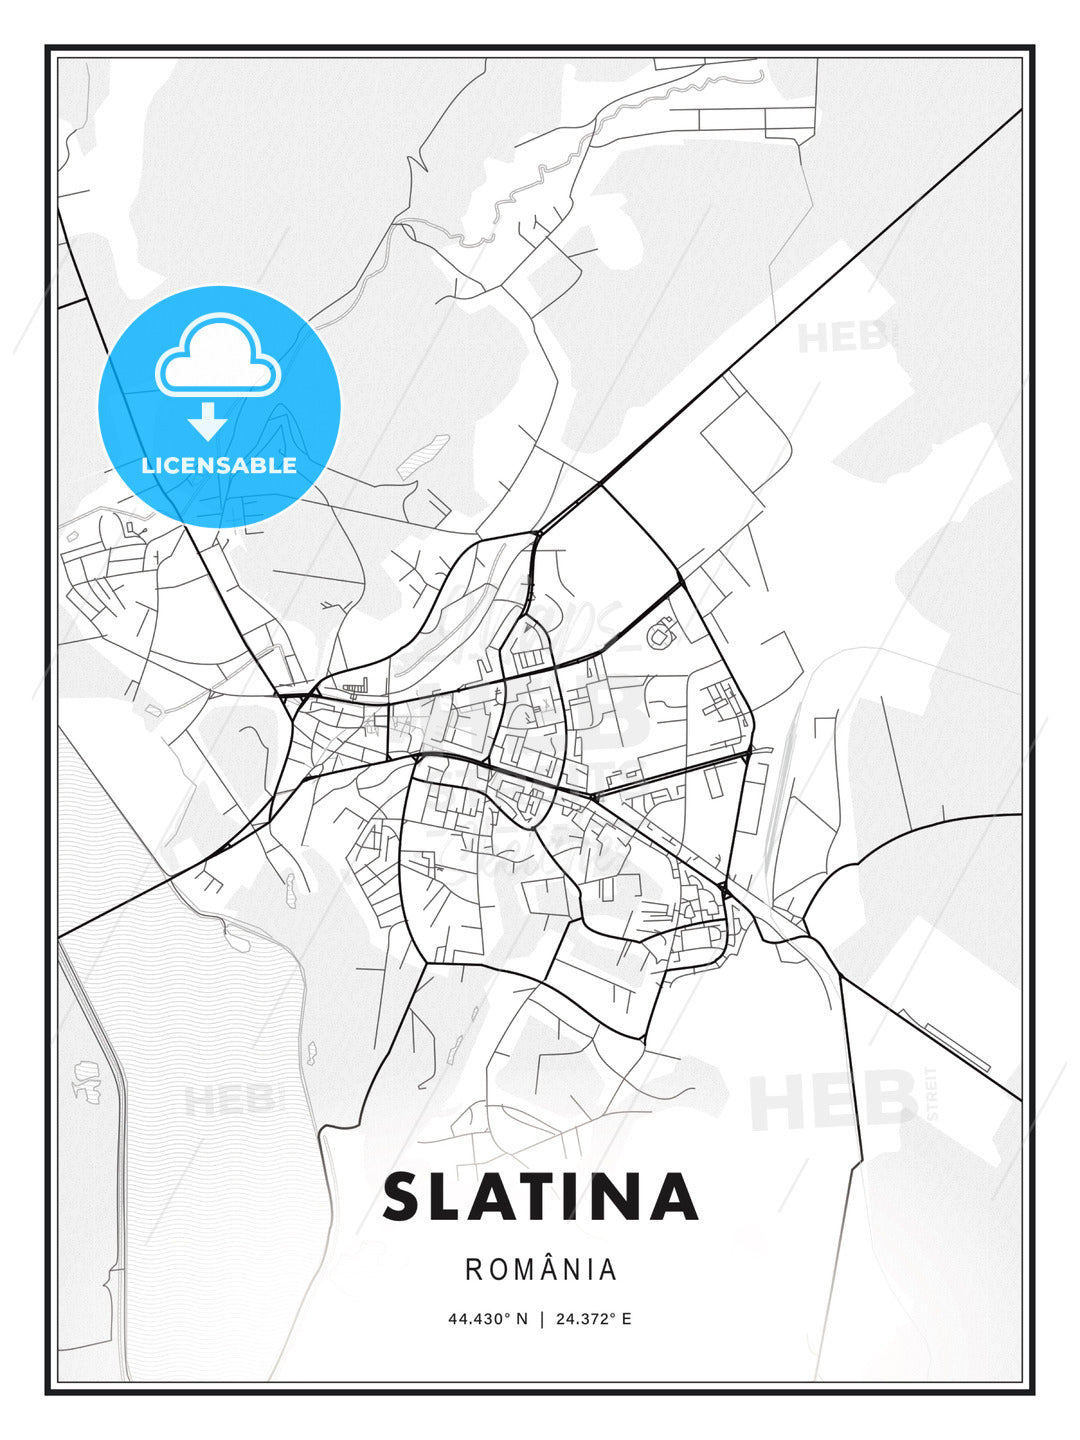 Slatina, Romania, Modern Print Template in Various Formats - HEBSTREITS Sketches